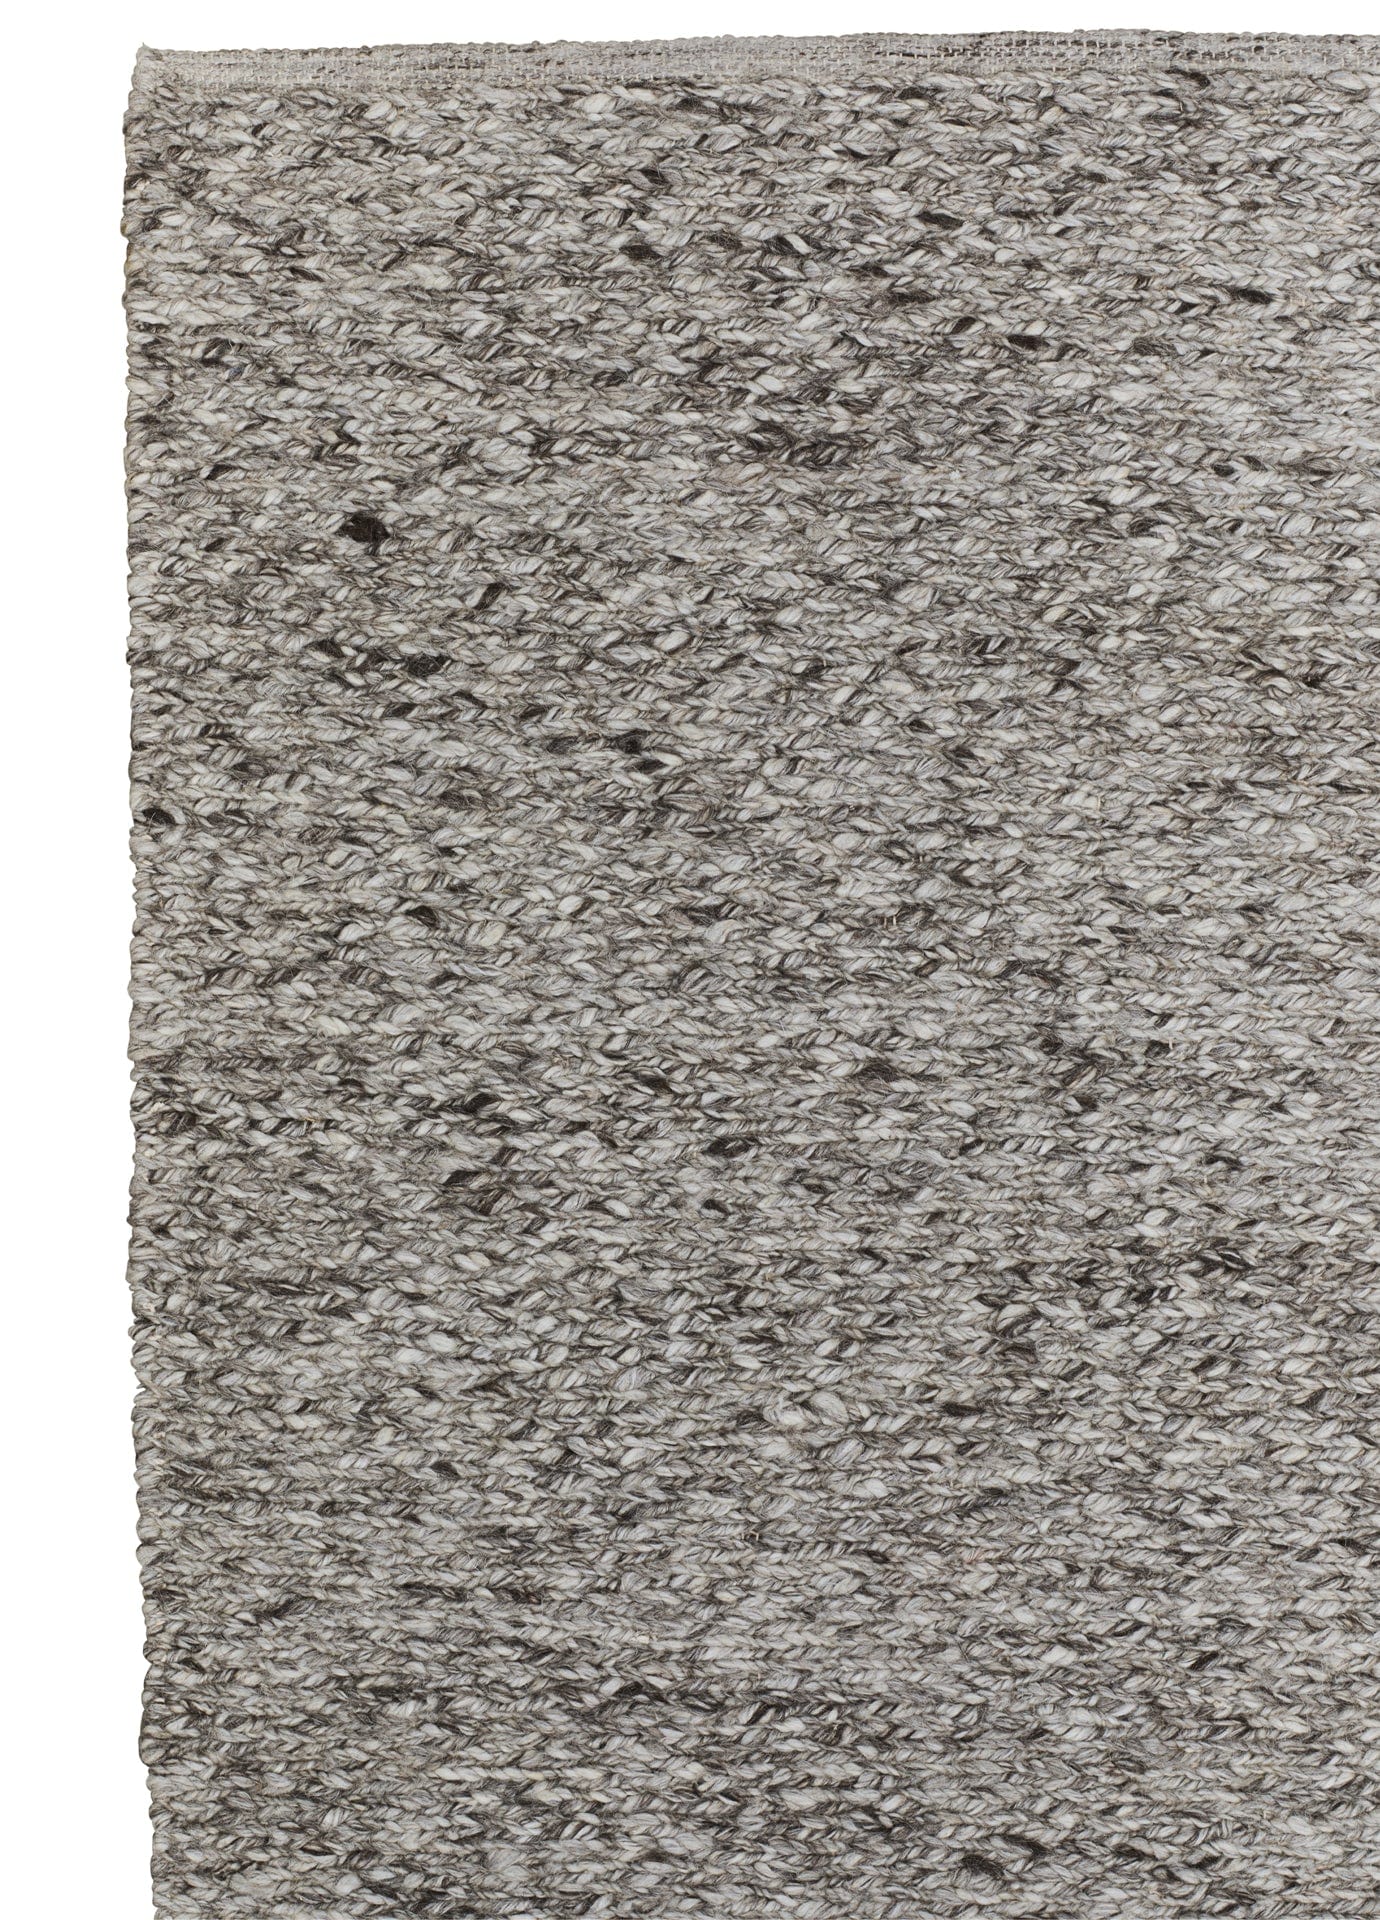 Armadillo&Co Rugs Armadillo Andes Weave Rug - Pumice (4733361750100)